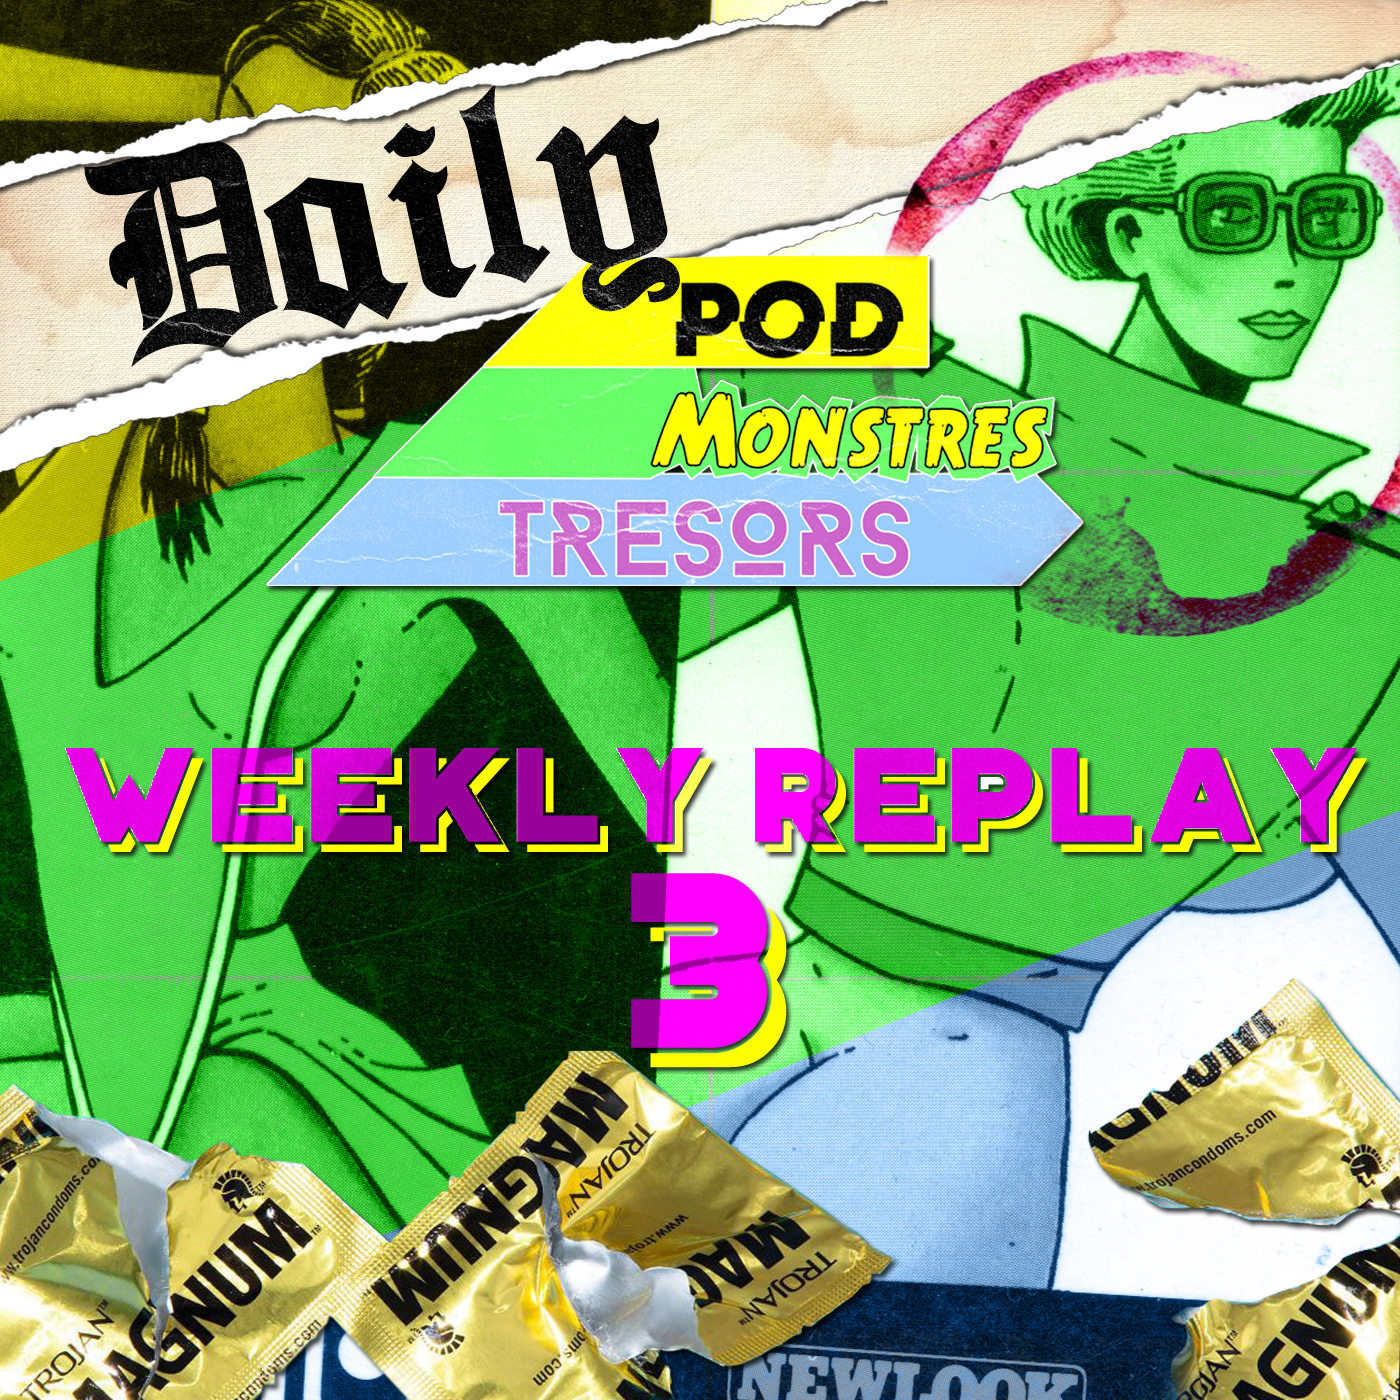 Daily Pod Monstres Trésors : Mexico Melody – Le Weekly Replay 3